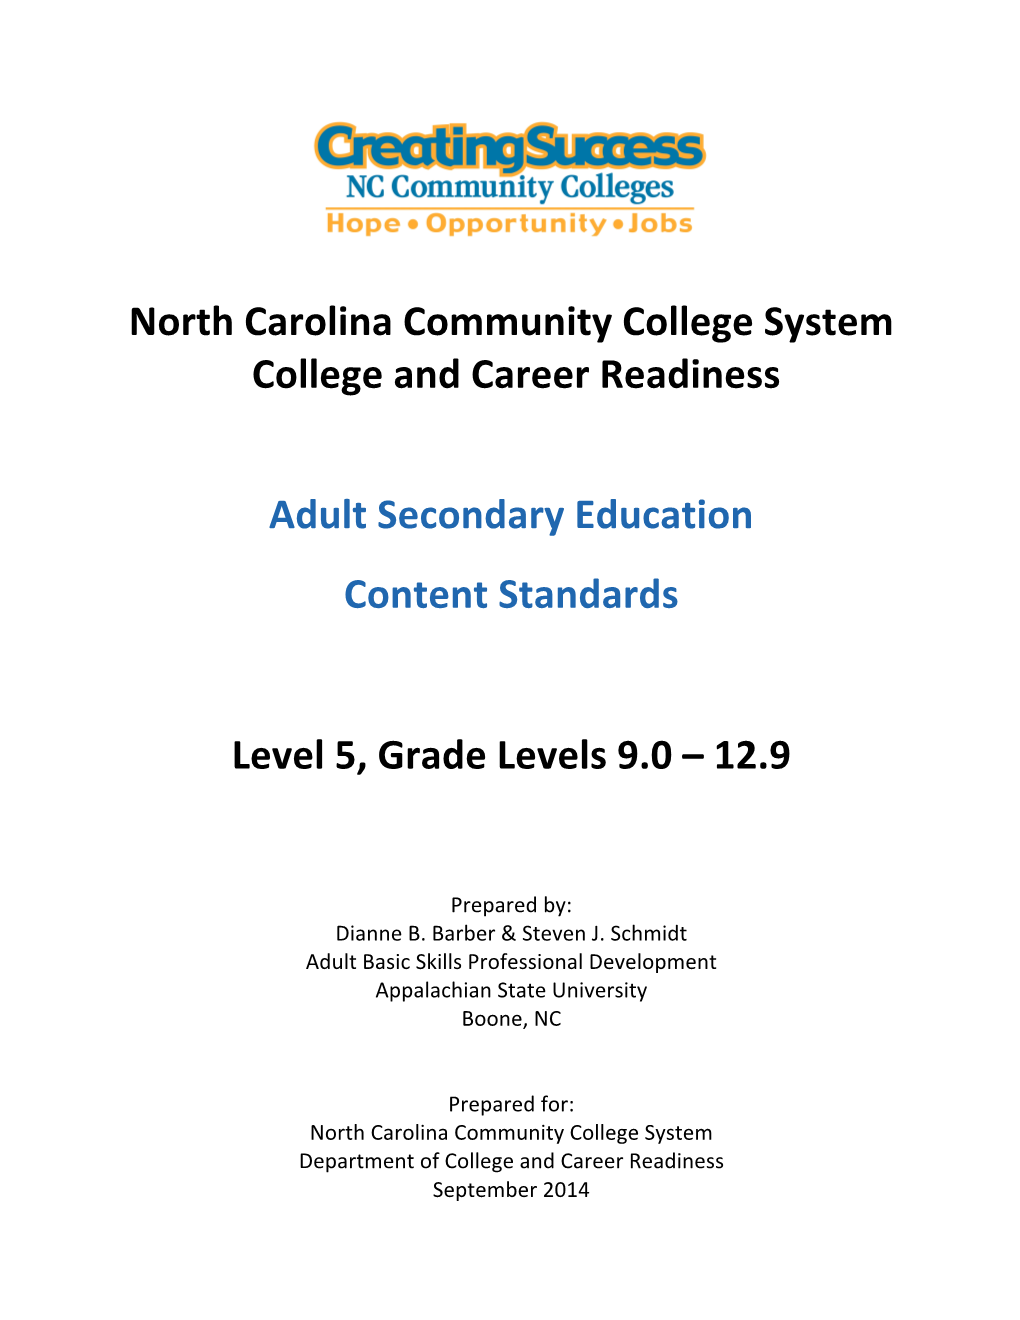 Adult Secondary Education Content Standards